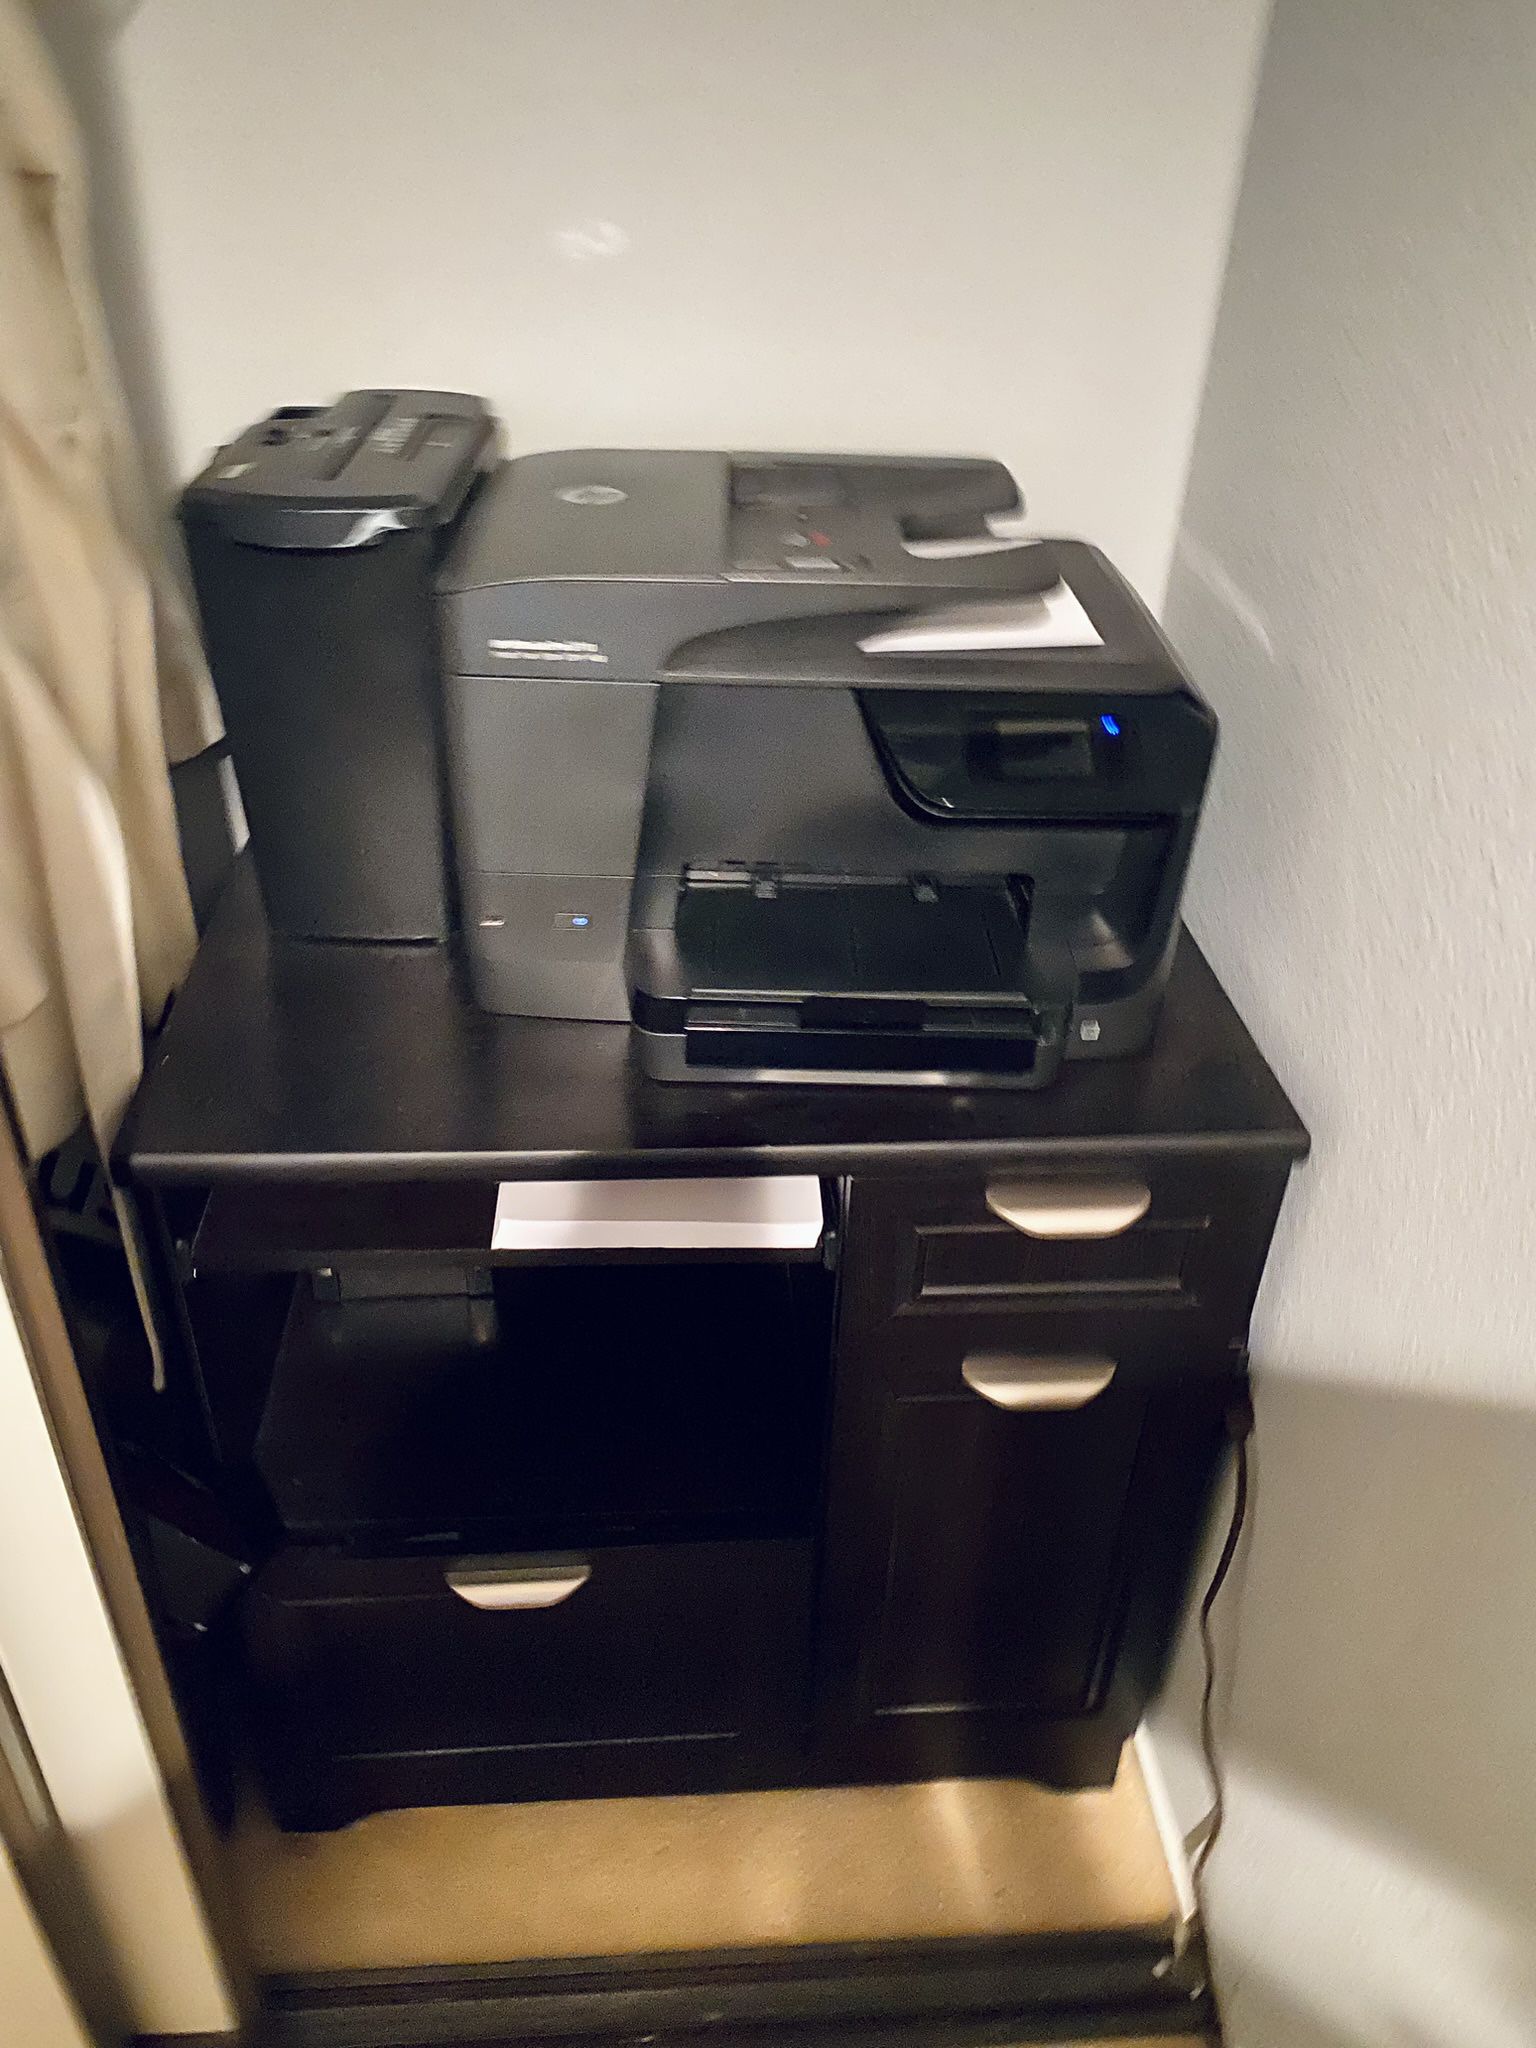 Printer Stand With Storage